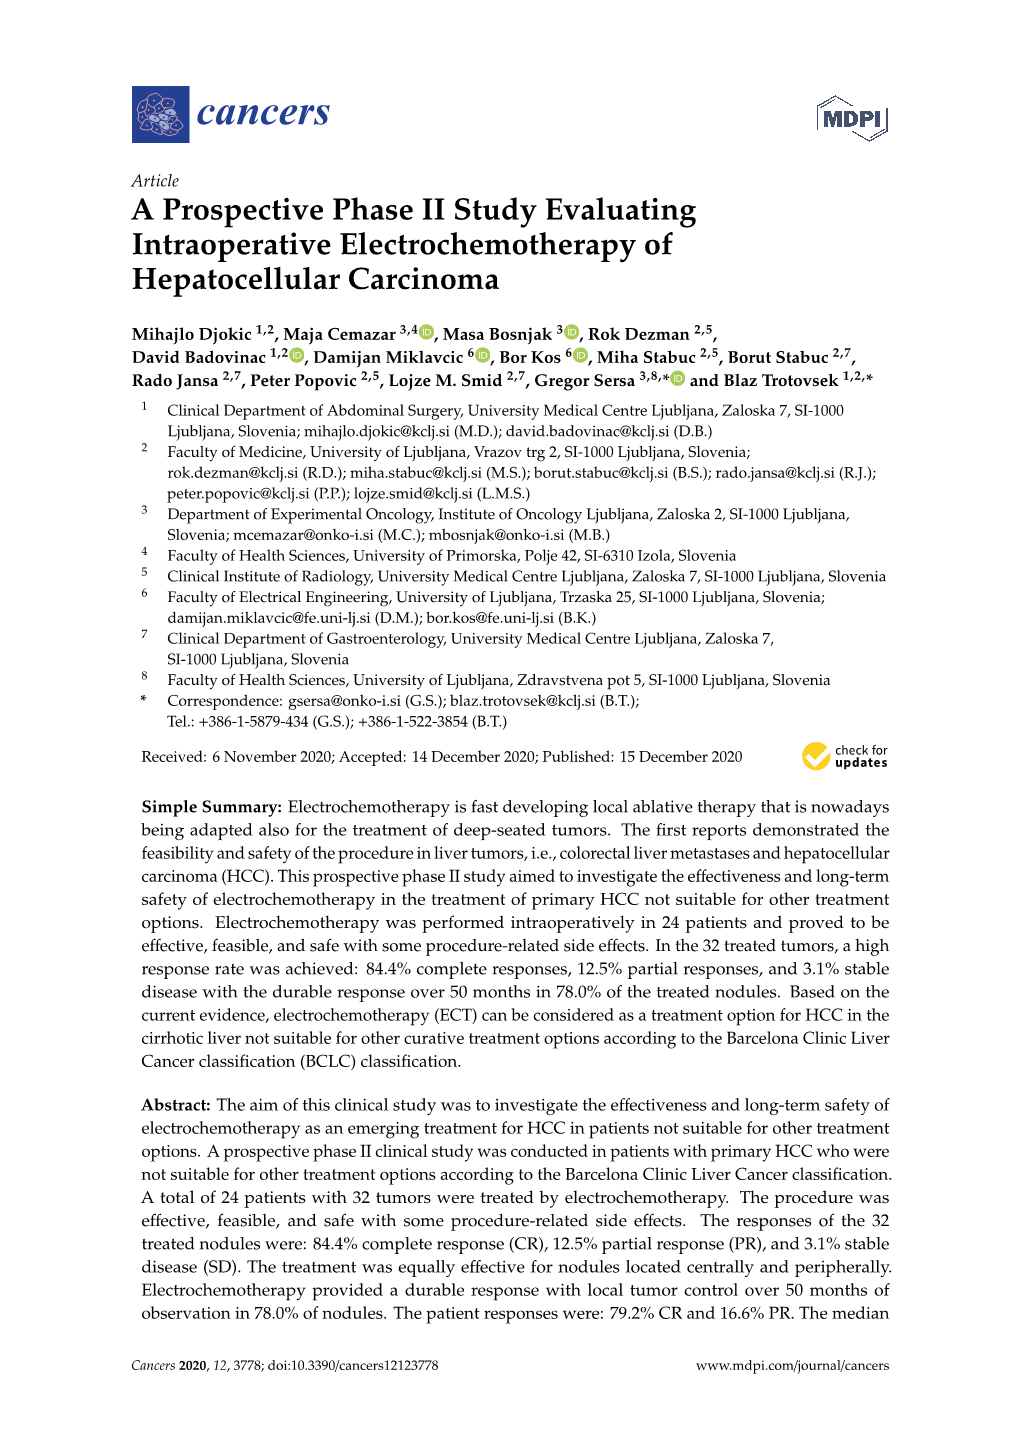 A Prospective Phase II Study Evaluating Intraoperative Electrochemotherapy of Hepatocellular Carcinoma